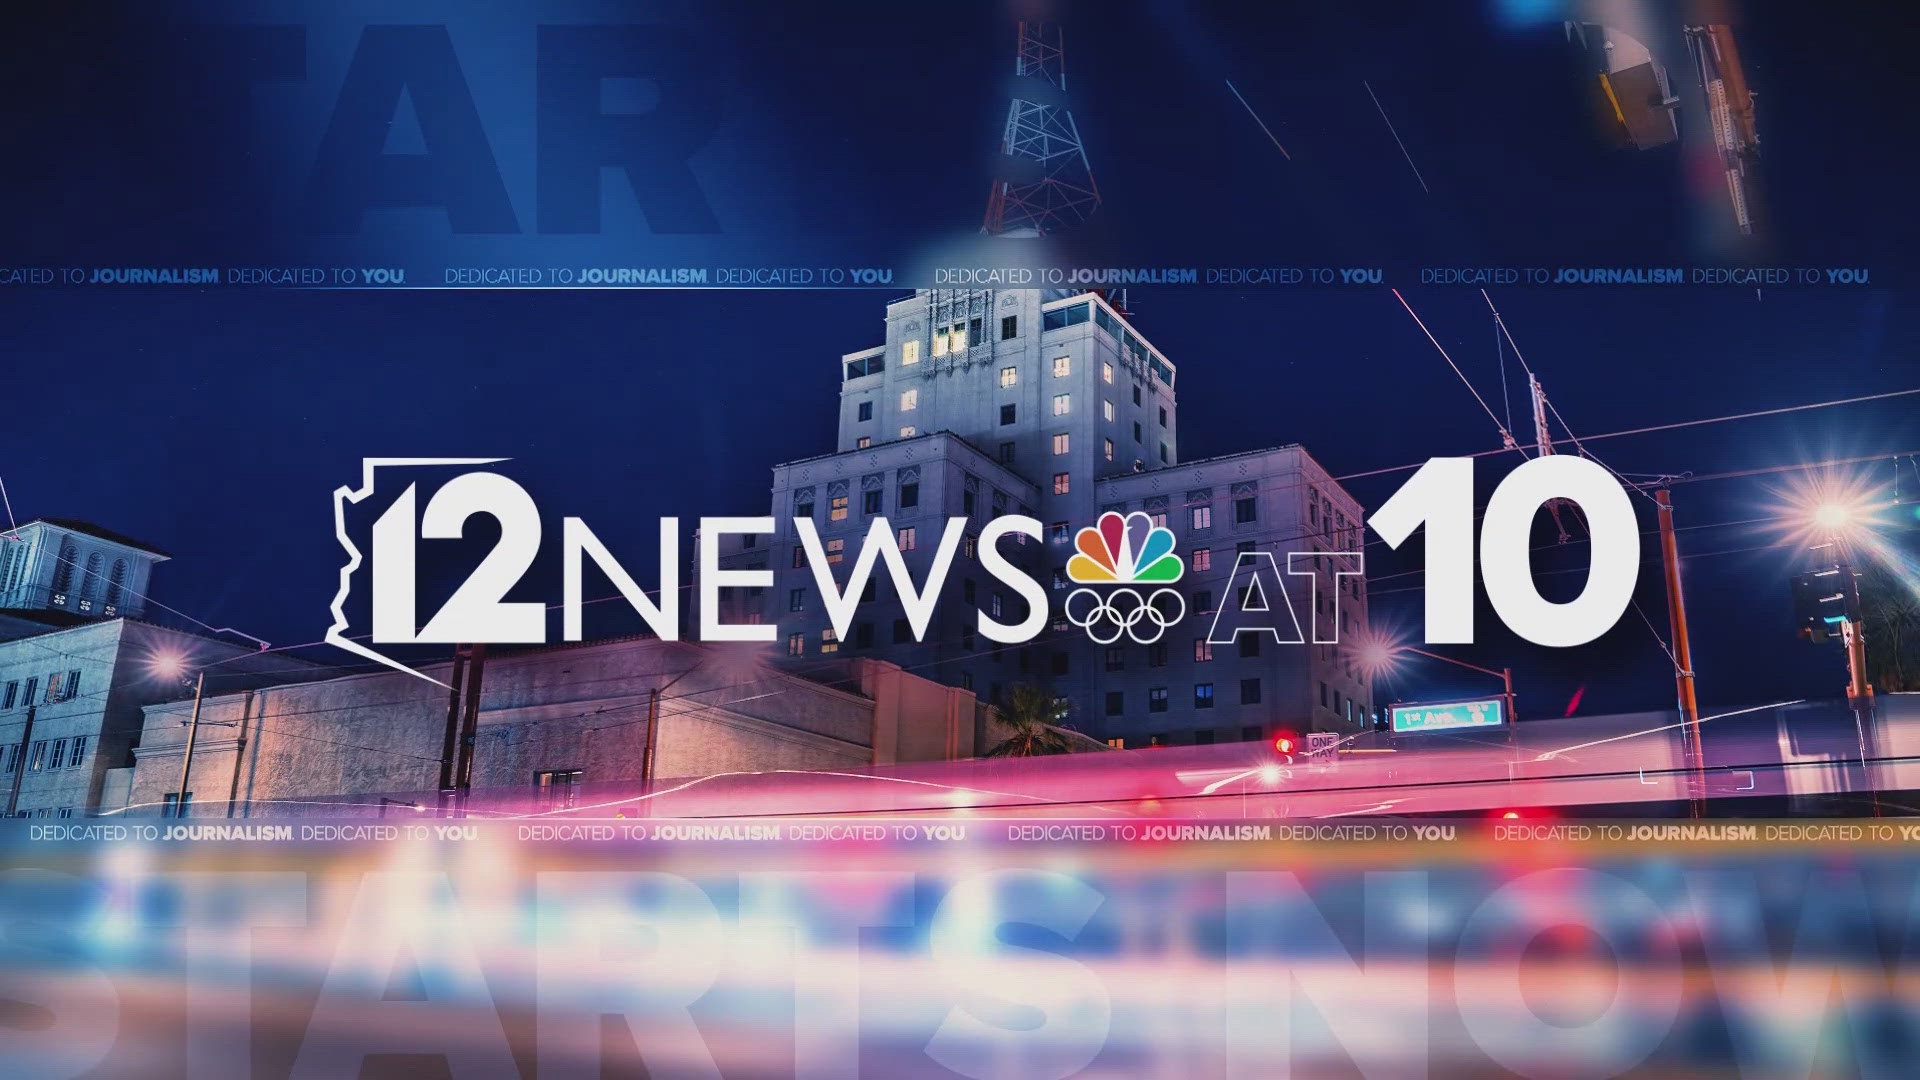 12News has your tops stories for May 14.